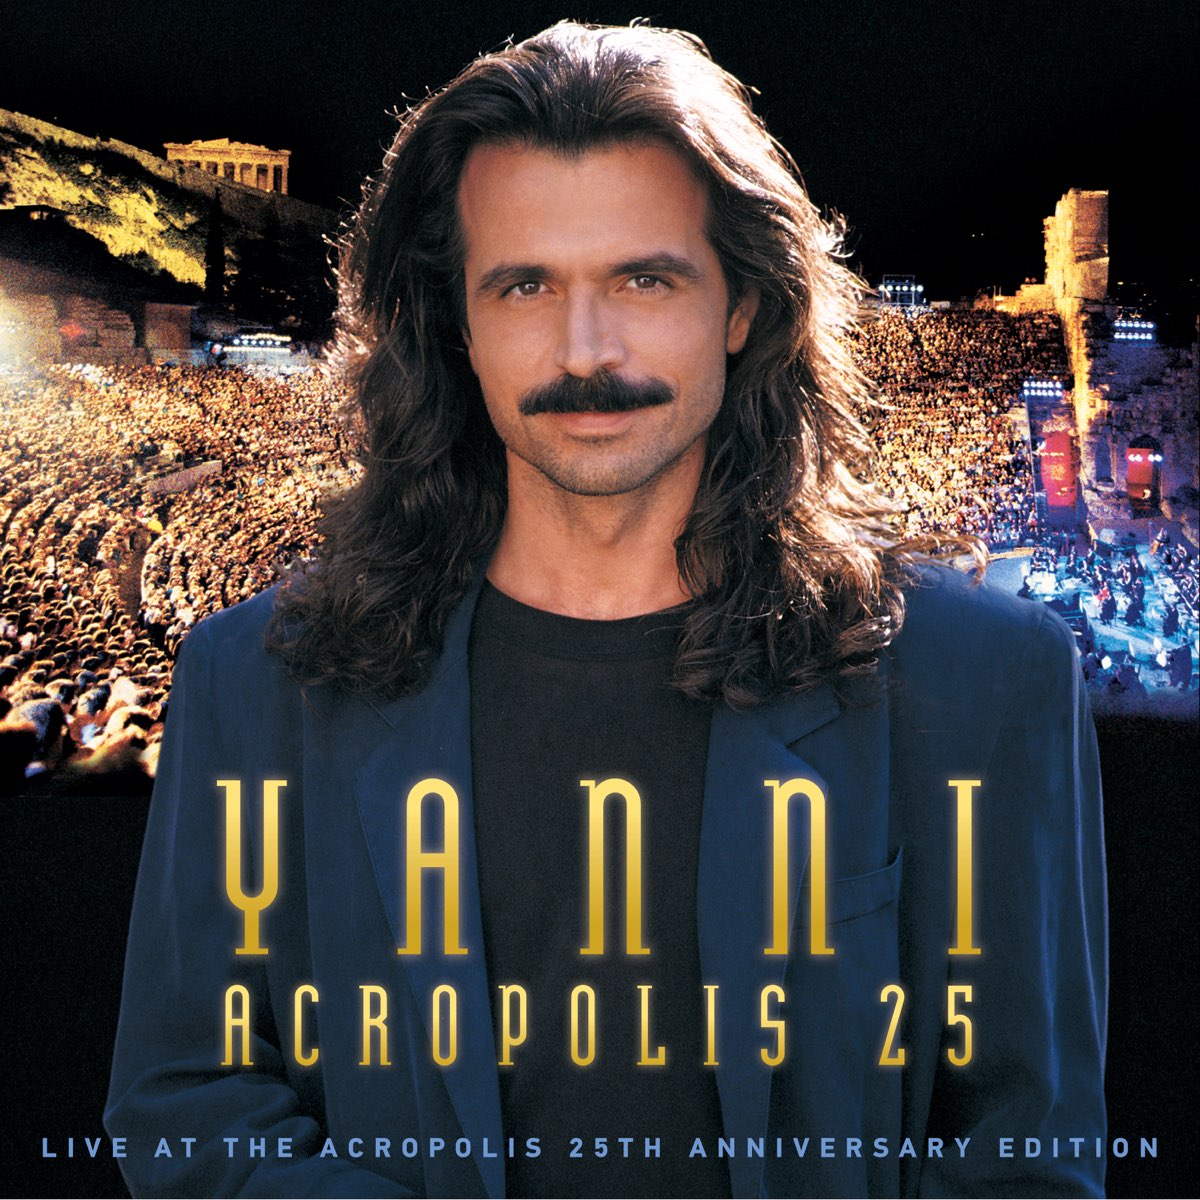 ‎Live at the Acropolis 25th Anniversary Deluxe Edition (Remastered